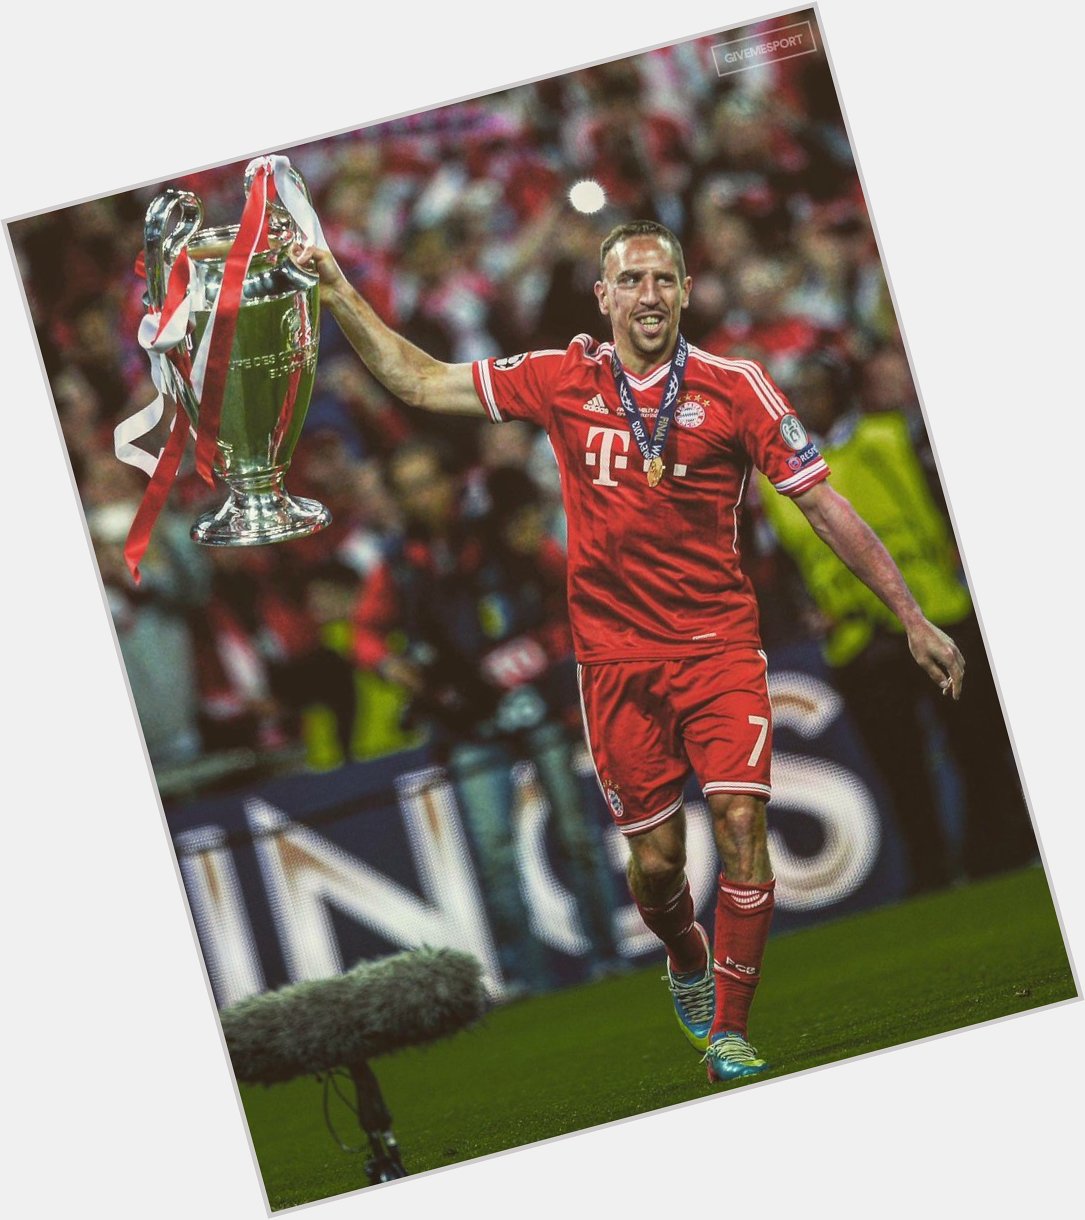 Happy birthday, Franck Ribéry! As described by Zizou, he is the Jewel of French football. 